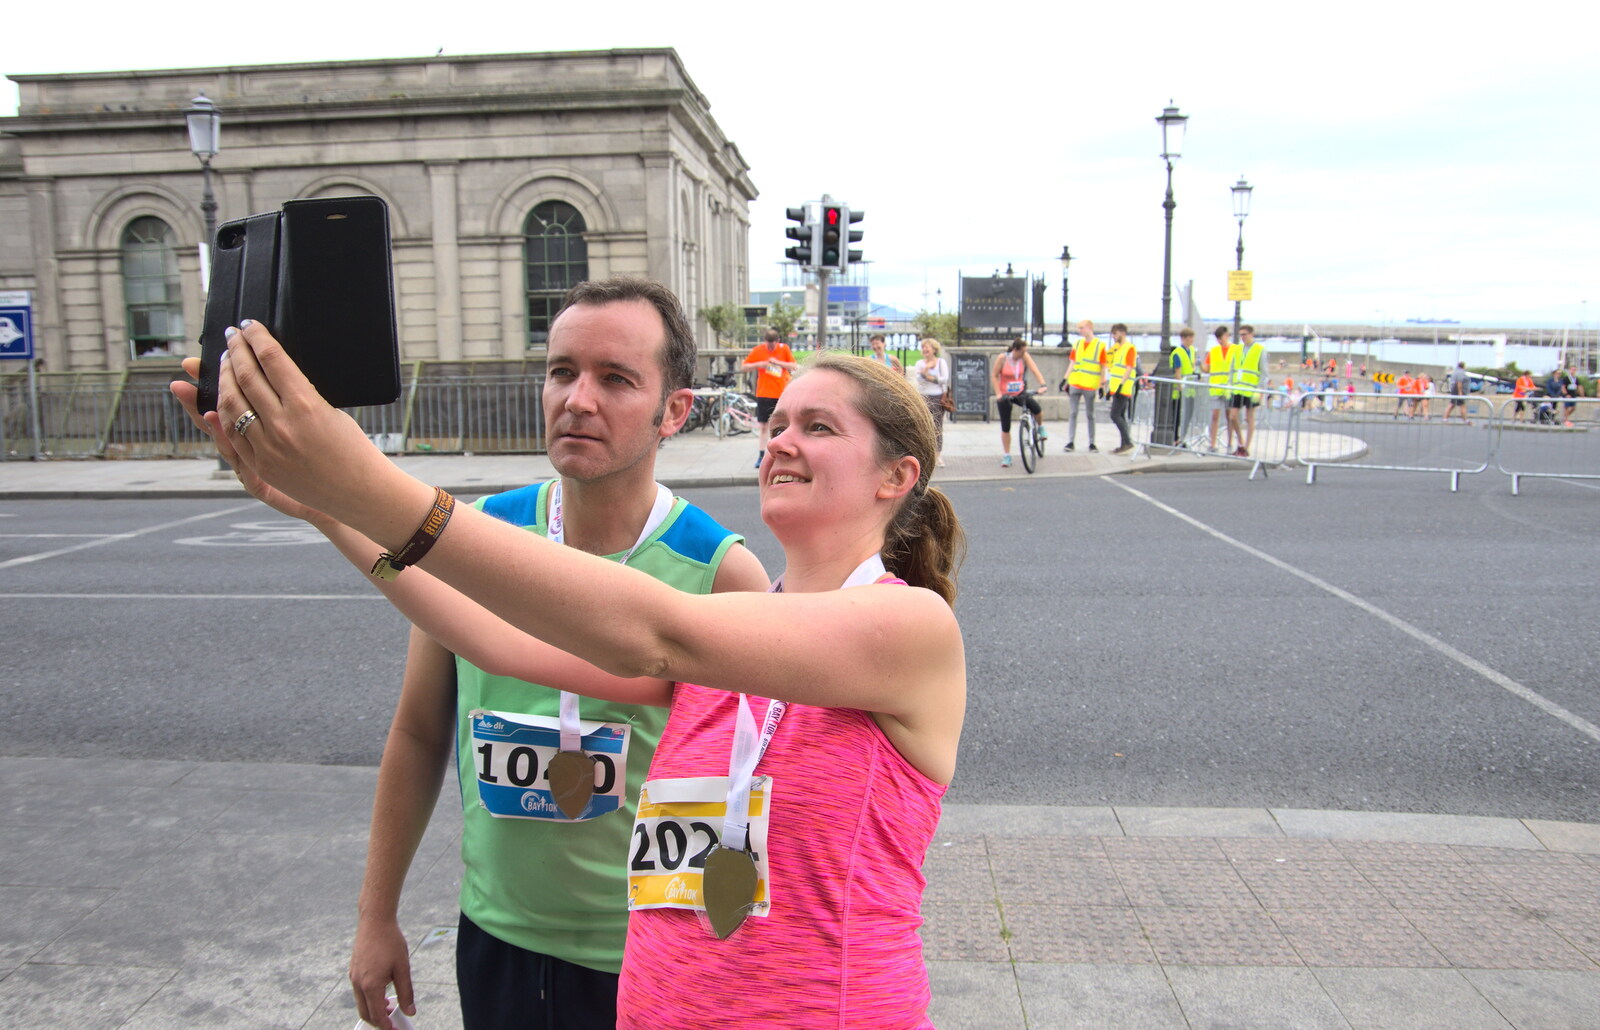 Isobel does a selfie with Jamie from The Dún Laoghaire 10k Run, County Dublin, Ireland - 6th August 2018